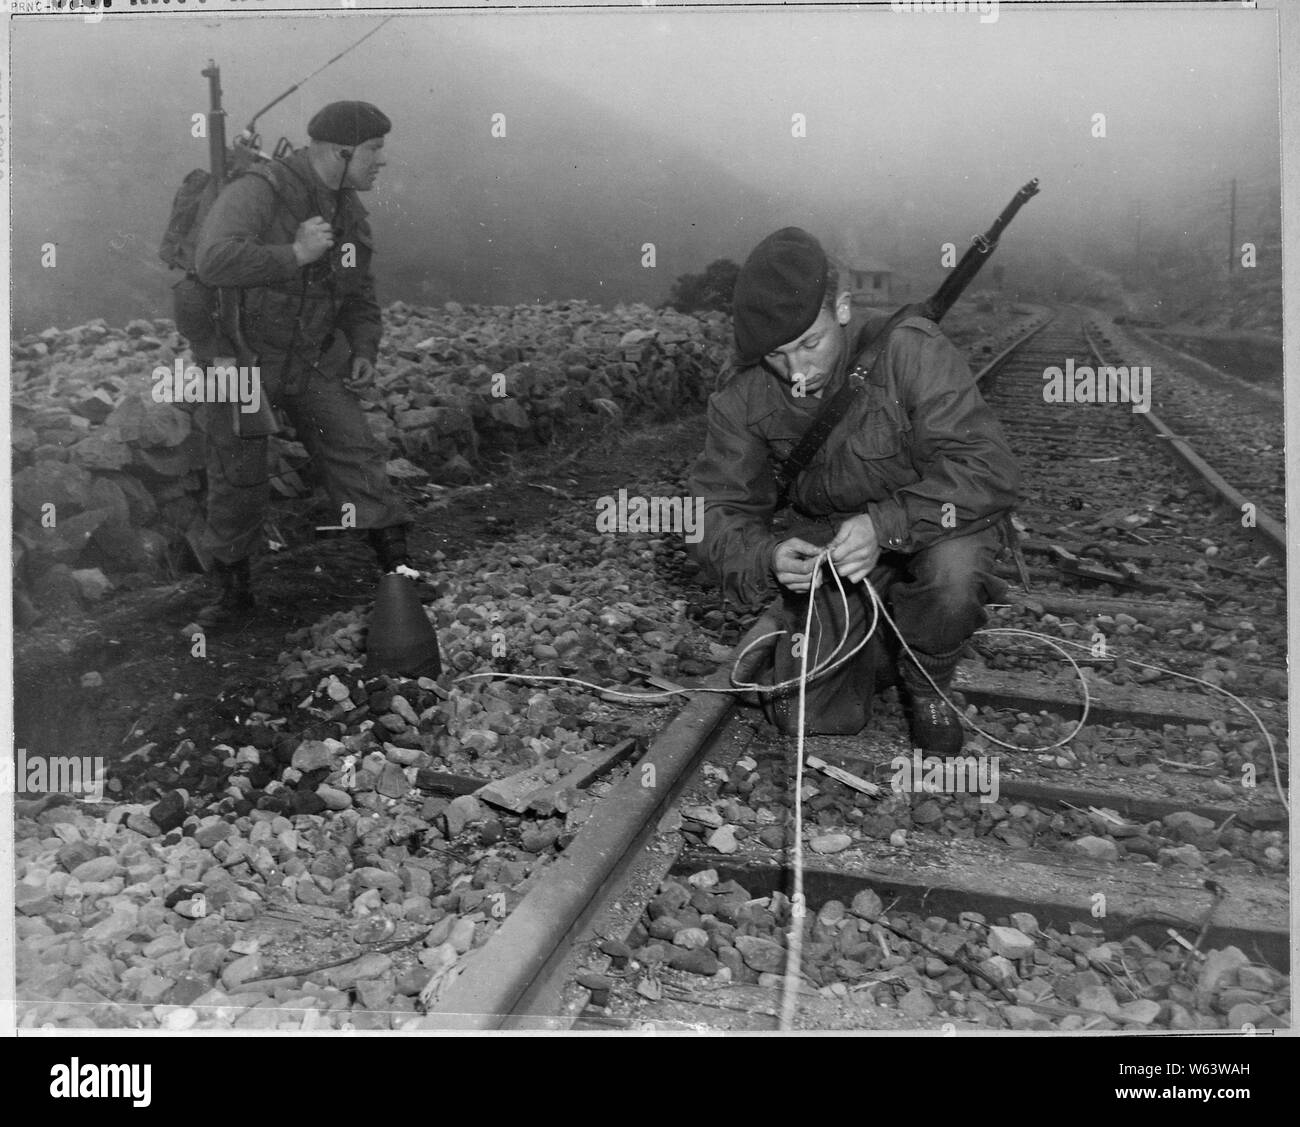 British Commandos of the 41st Royal Marines plant demolition charges along railroad tracks of enemy supply line which they demolished during a commando raid, 8 miles south of Songjin, Korea.; General notes:  Use War and Conflict Number 1434 when ordering a reproduction or requesting information about this image. Stock Photo